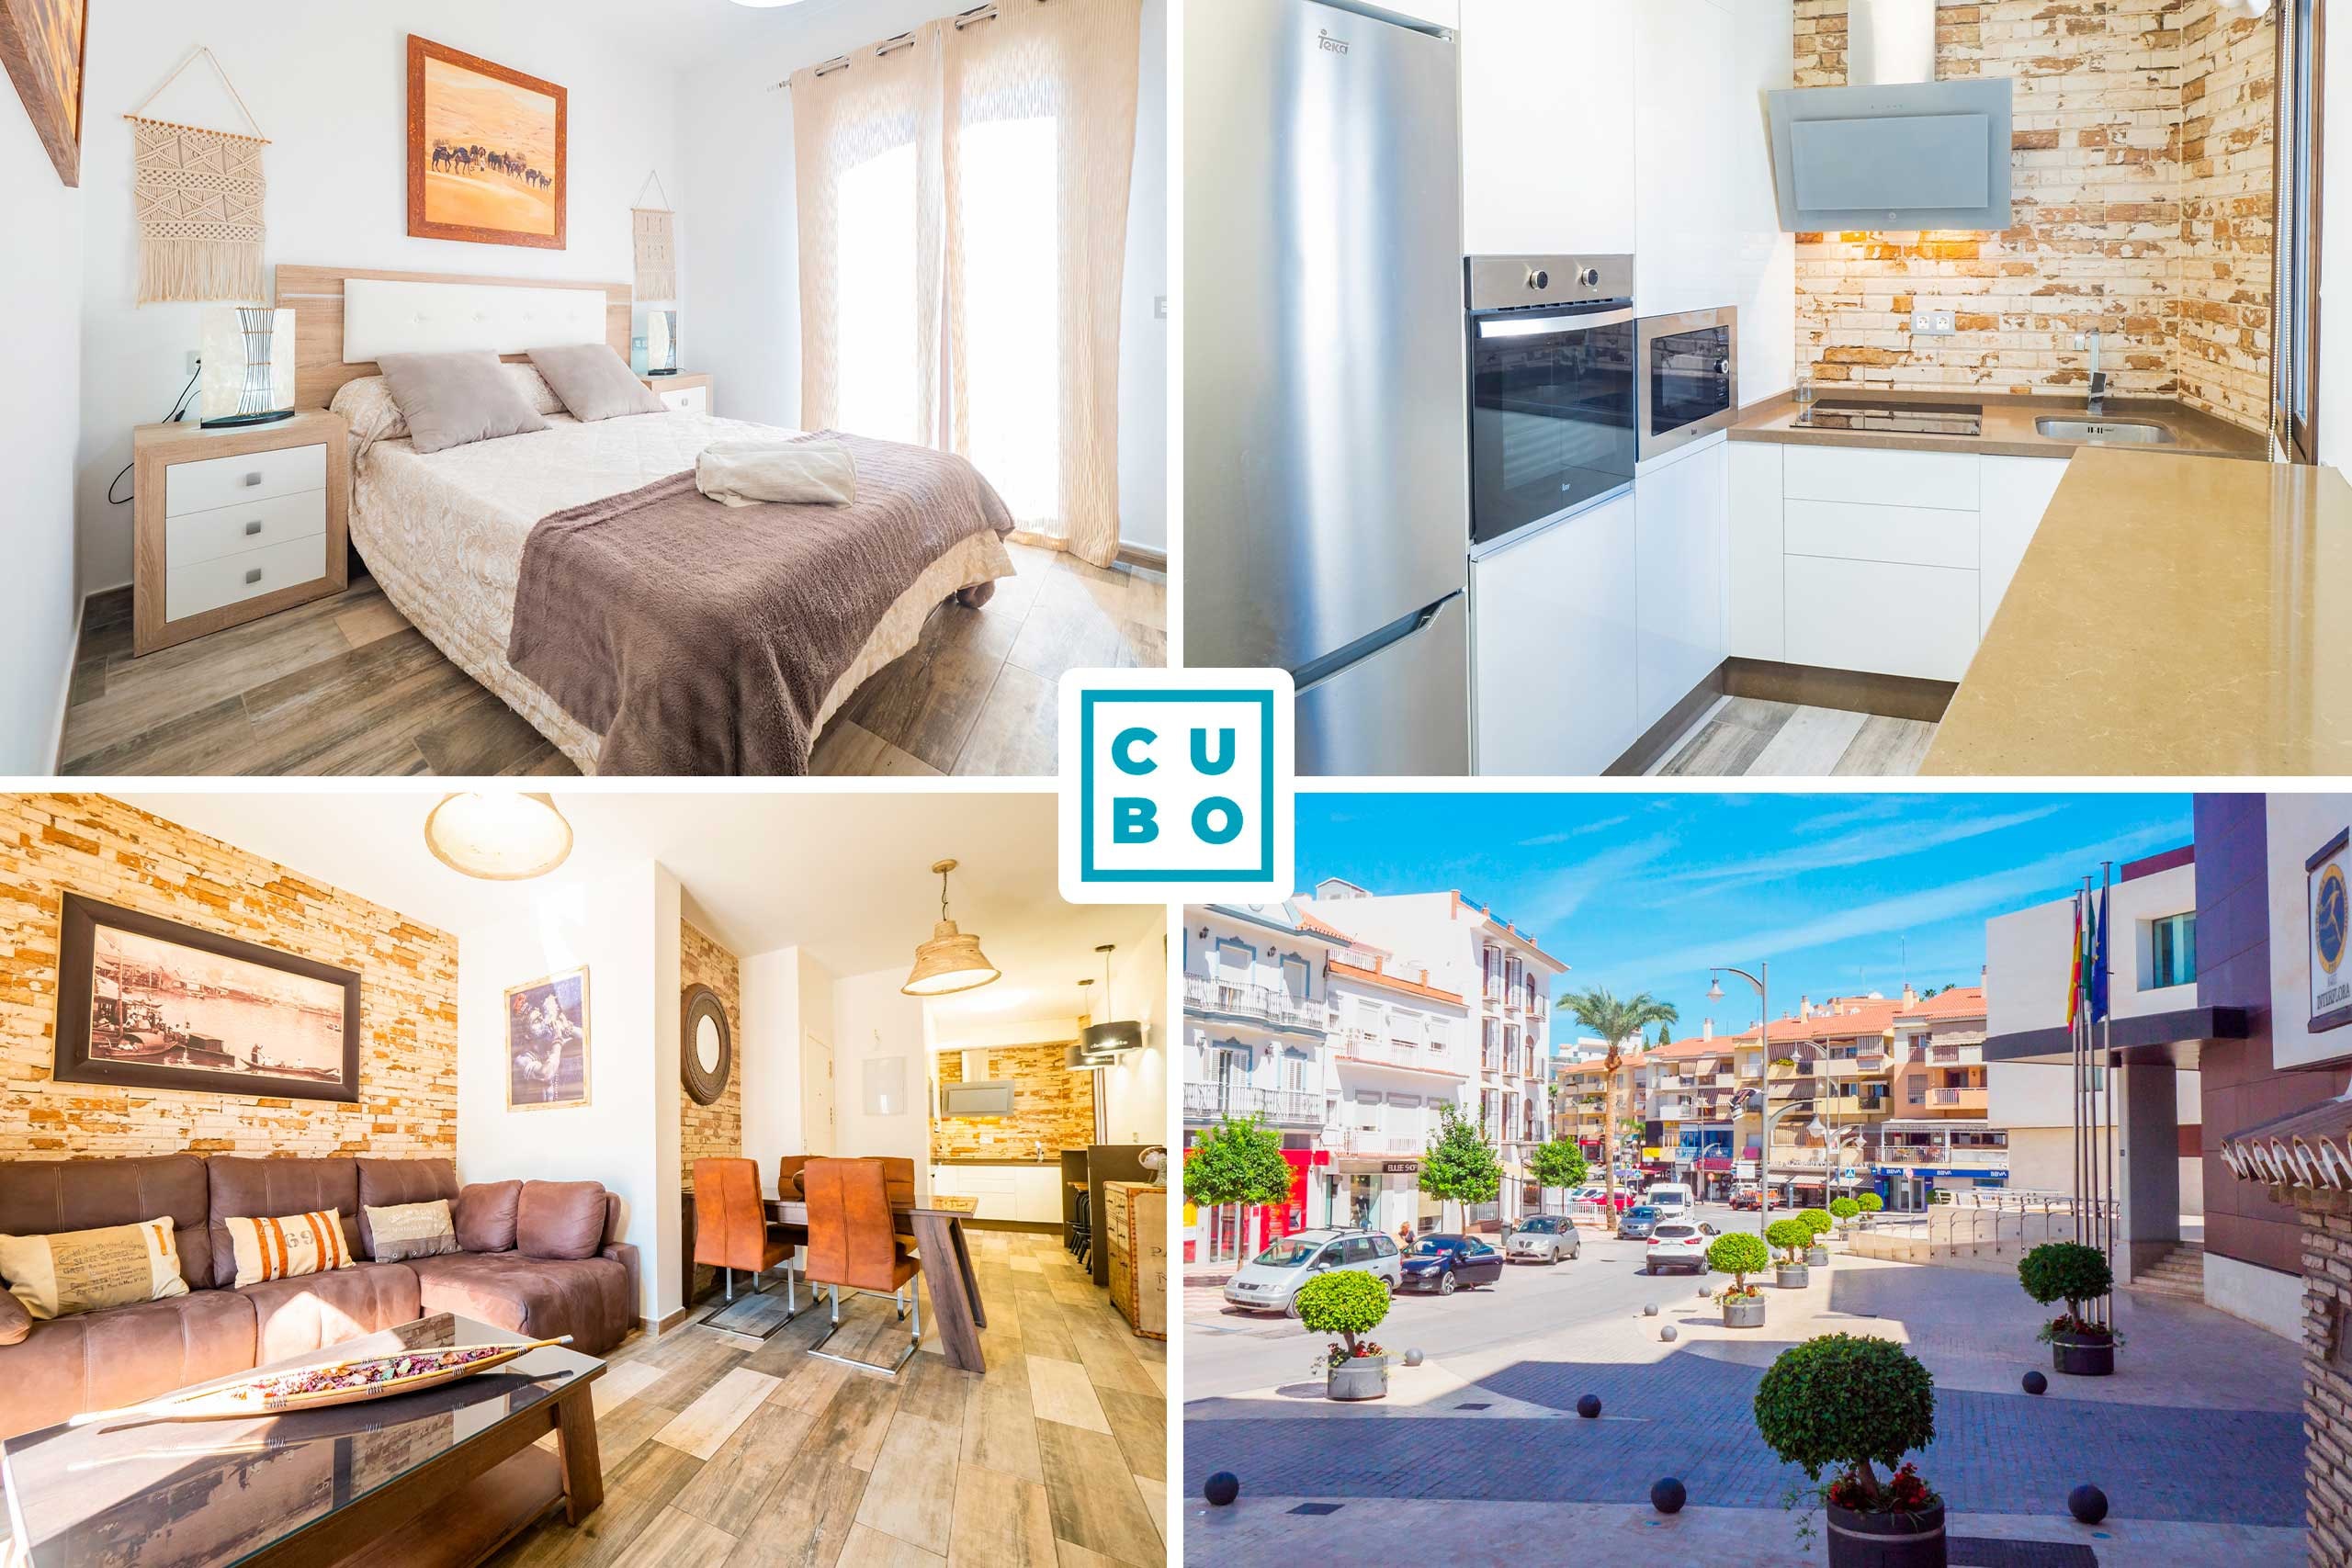 Urban holiday flat located in the centre of Alhaurín el Grande.